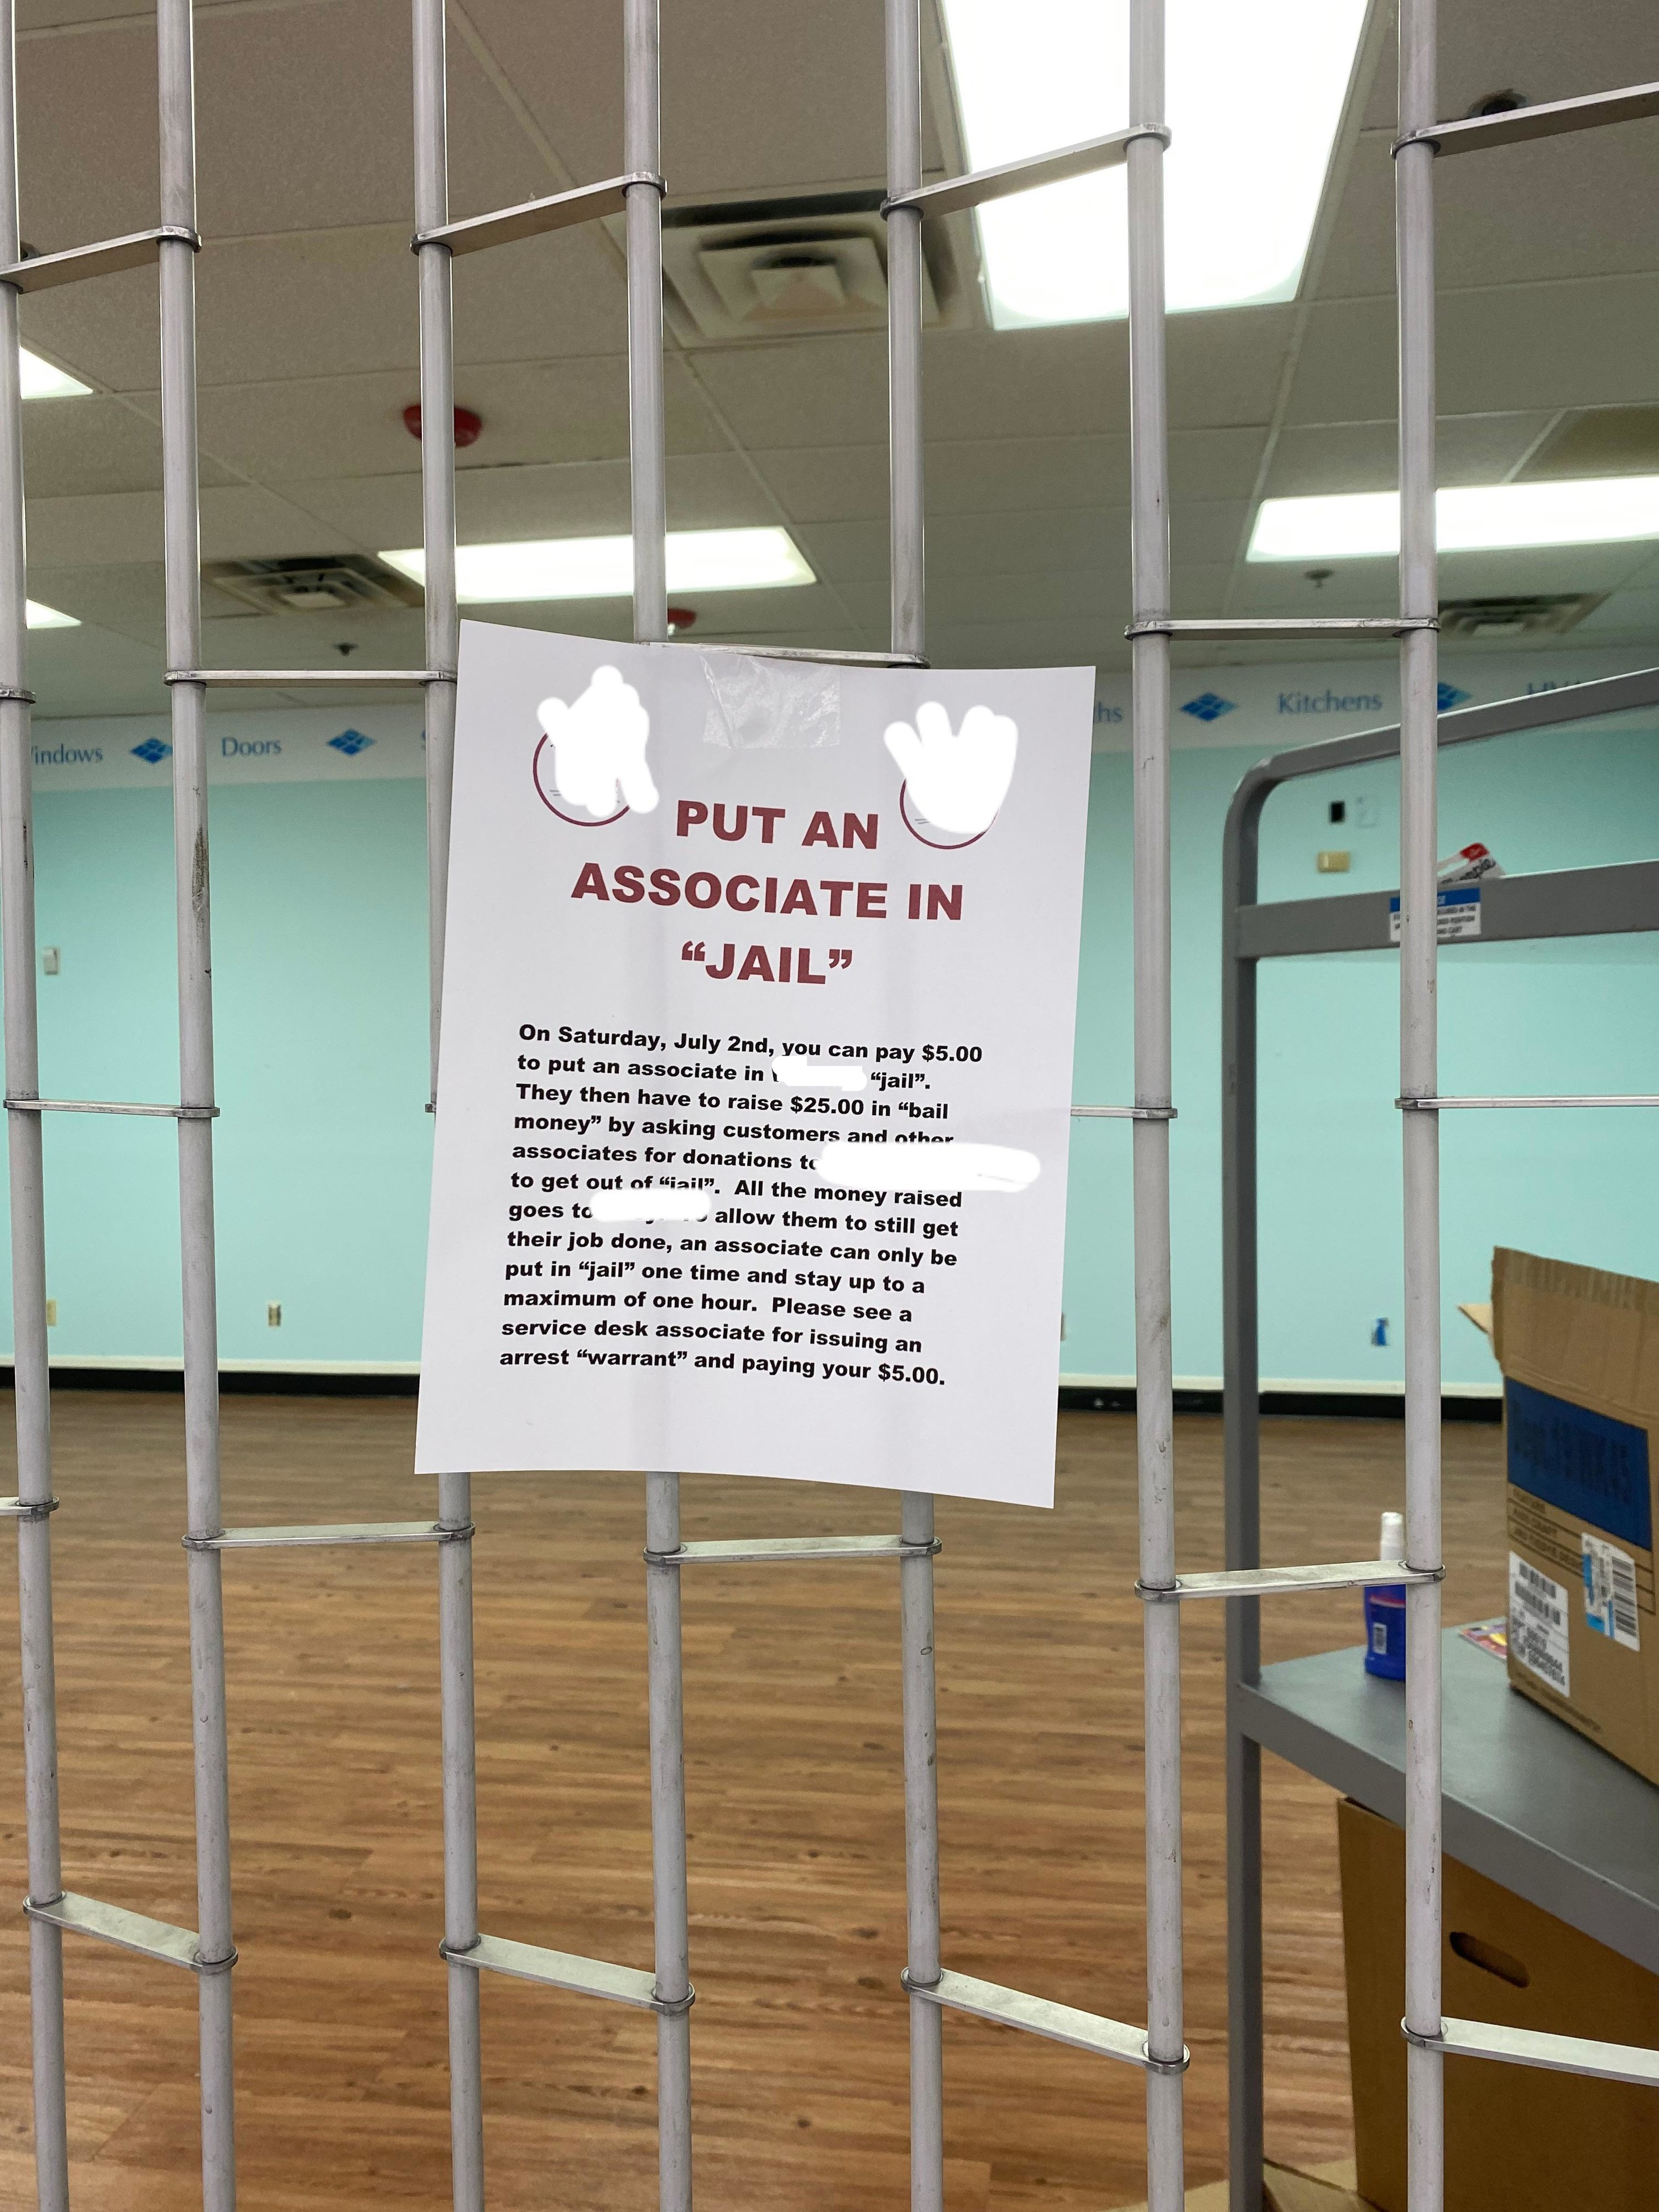 A notice asking to put an &quot;associate in jail.&quot;